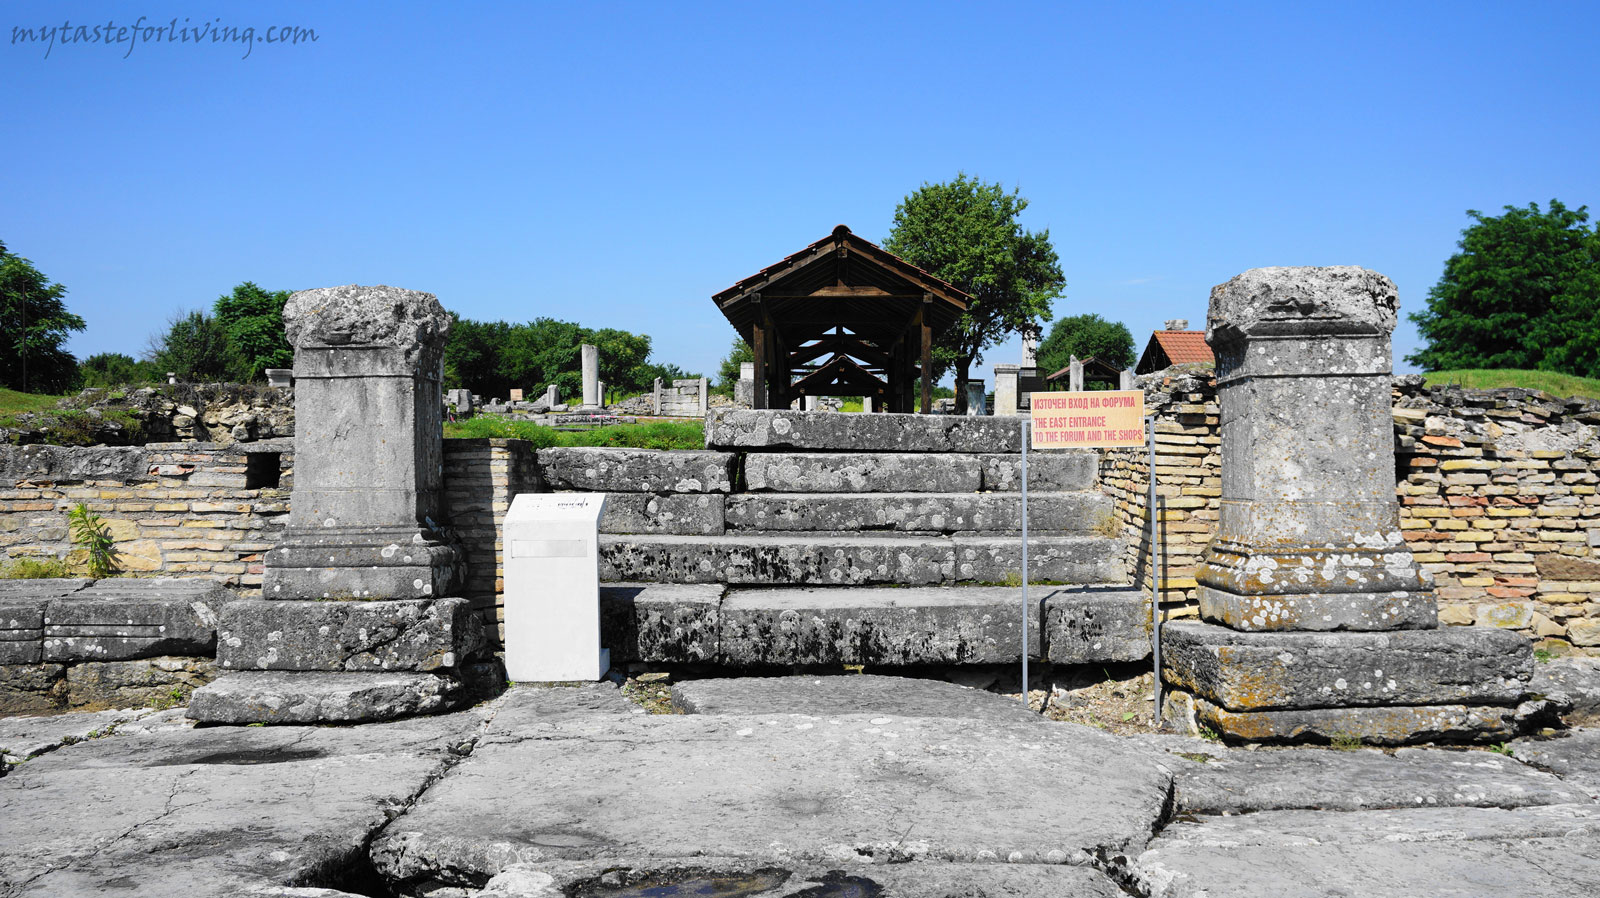 The remains of the early Byzantine town of Nicopolis ad Istrum (translated "City of Victory on the Danube") are located about 20 km north of the town of Veliko Tarnovo, Bulgaria, on the road to Ruse.